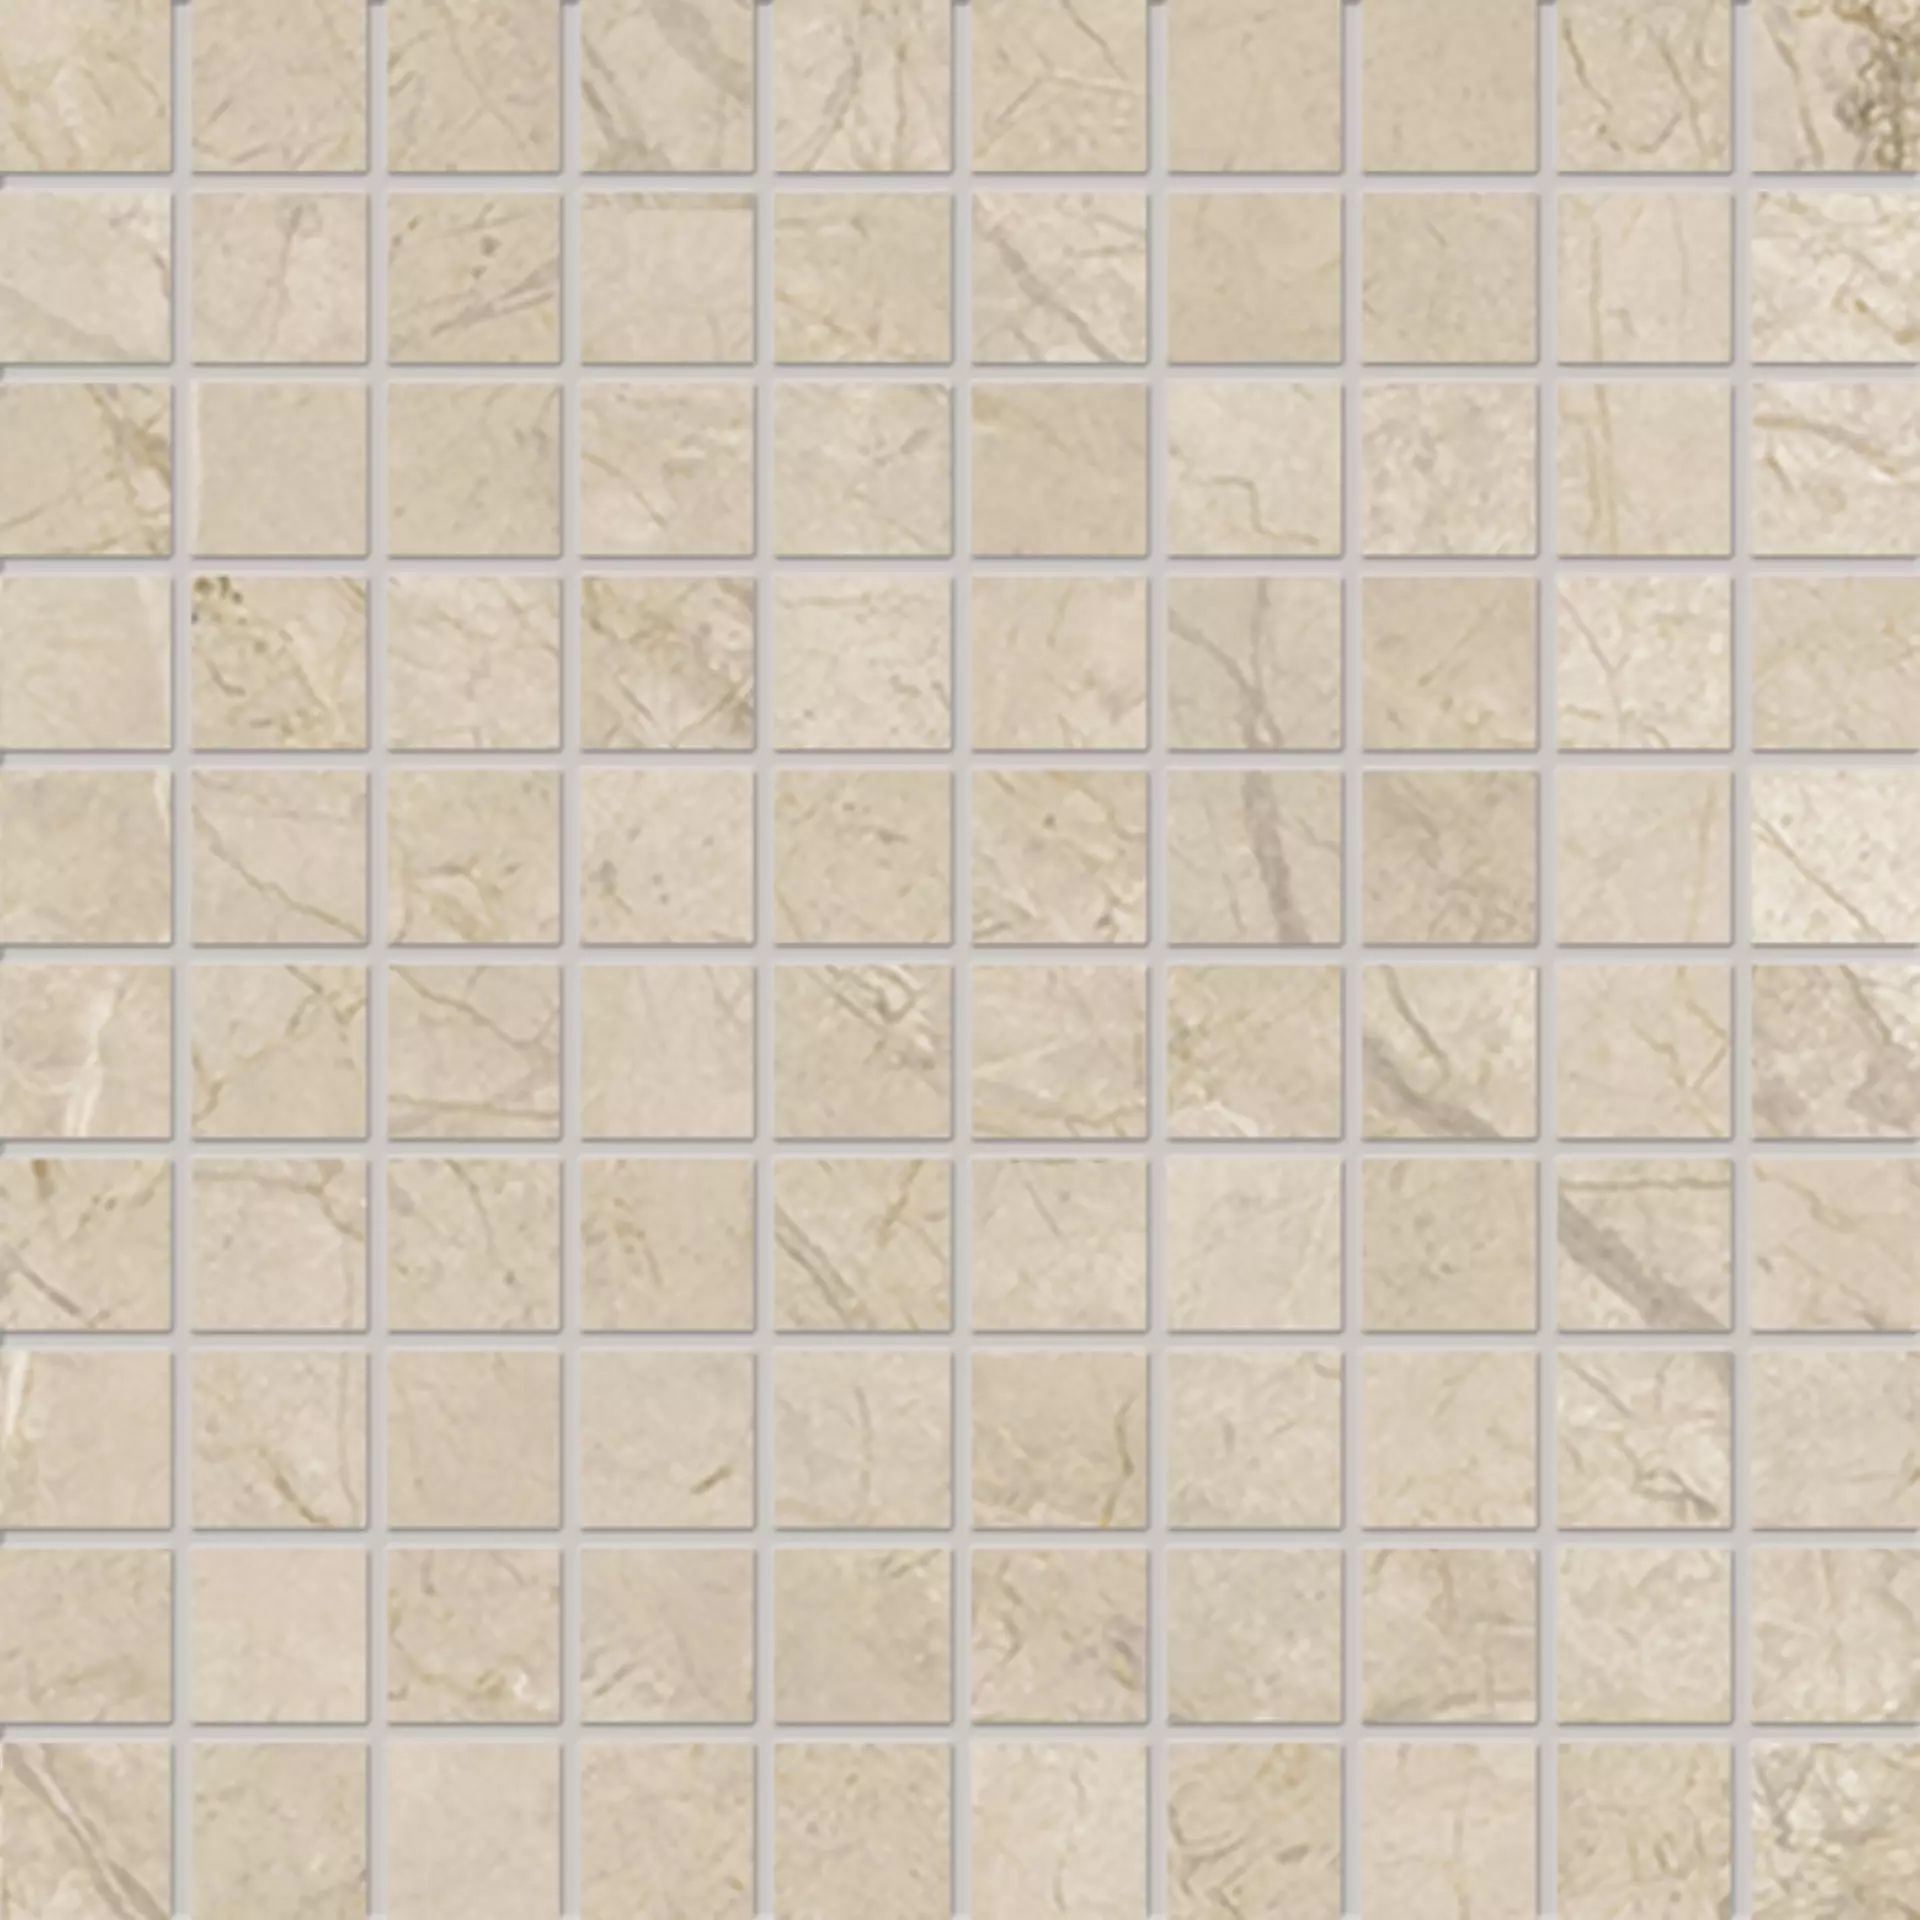 Keope Elements Lux Crema Beige Lappato Mosaic 41324D33 30x30cm rectified 9mm